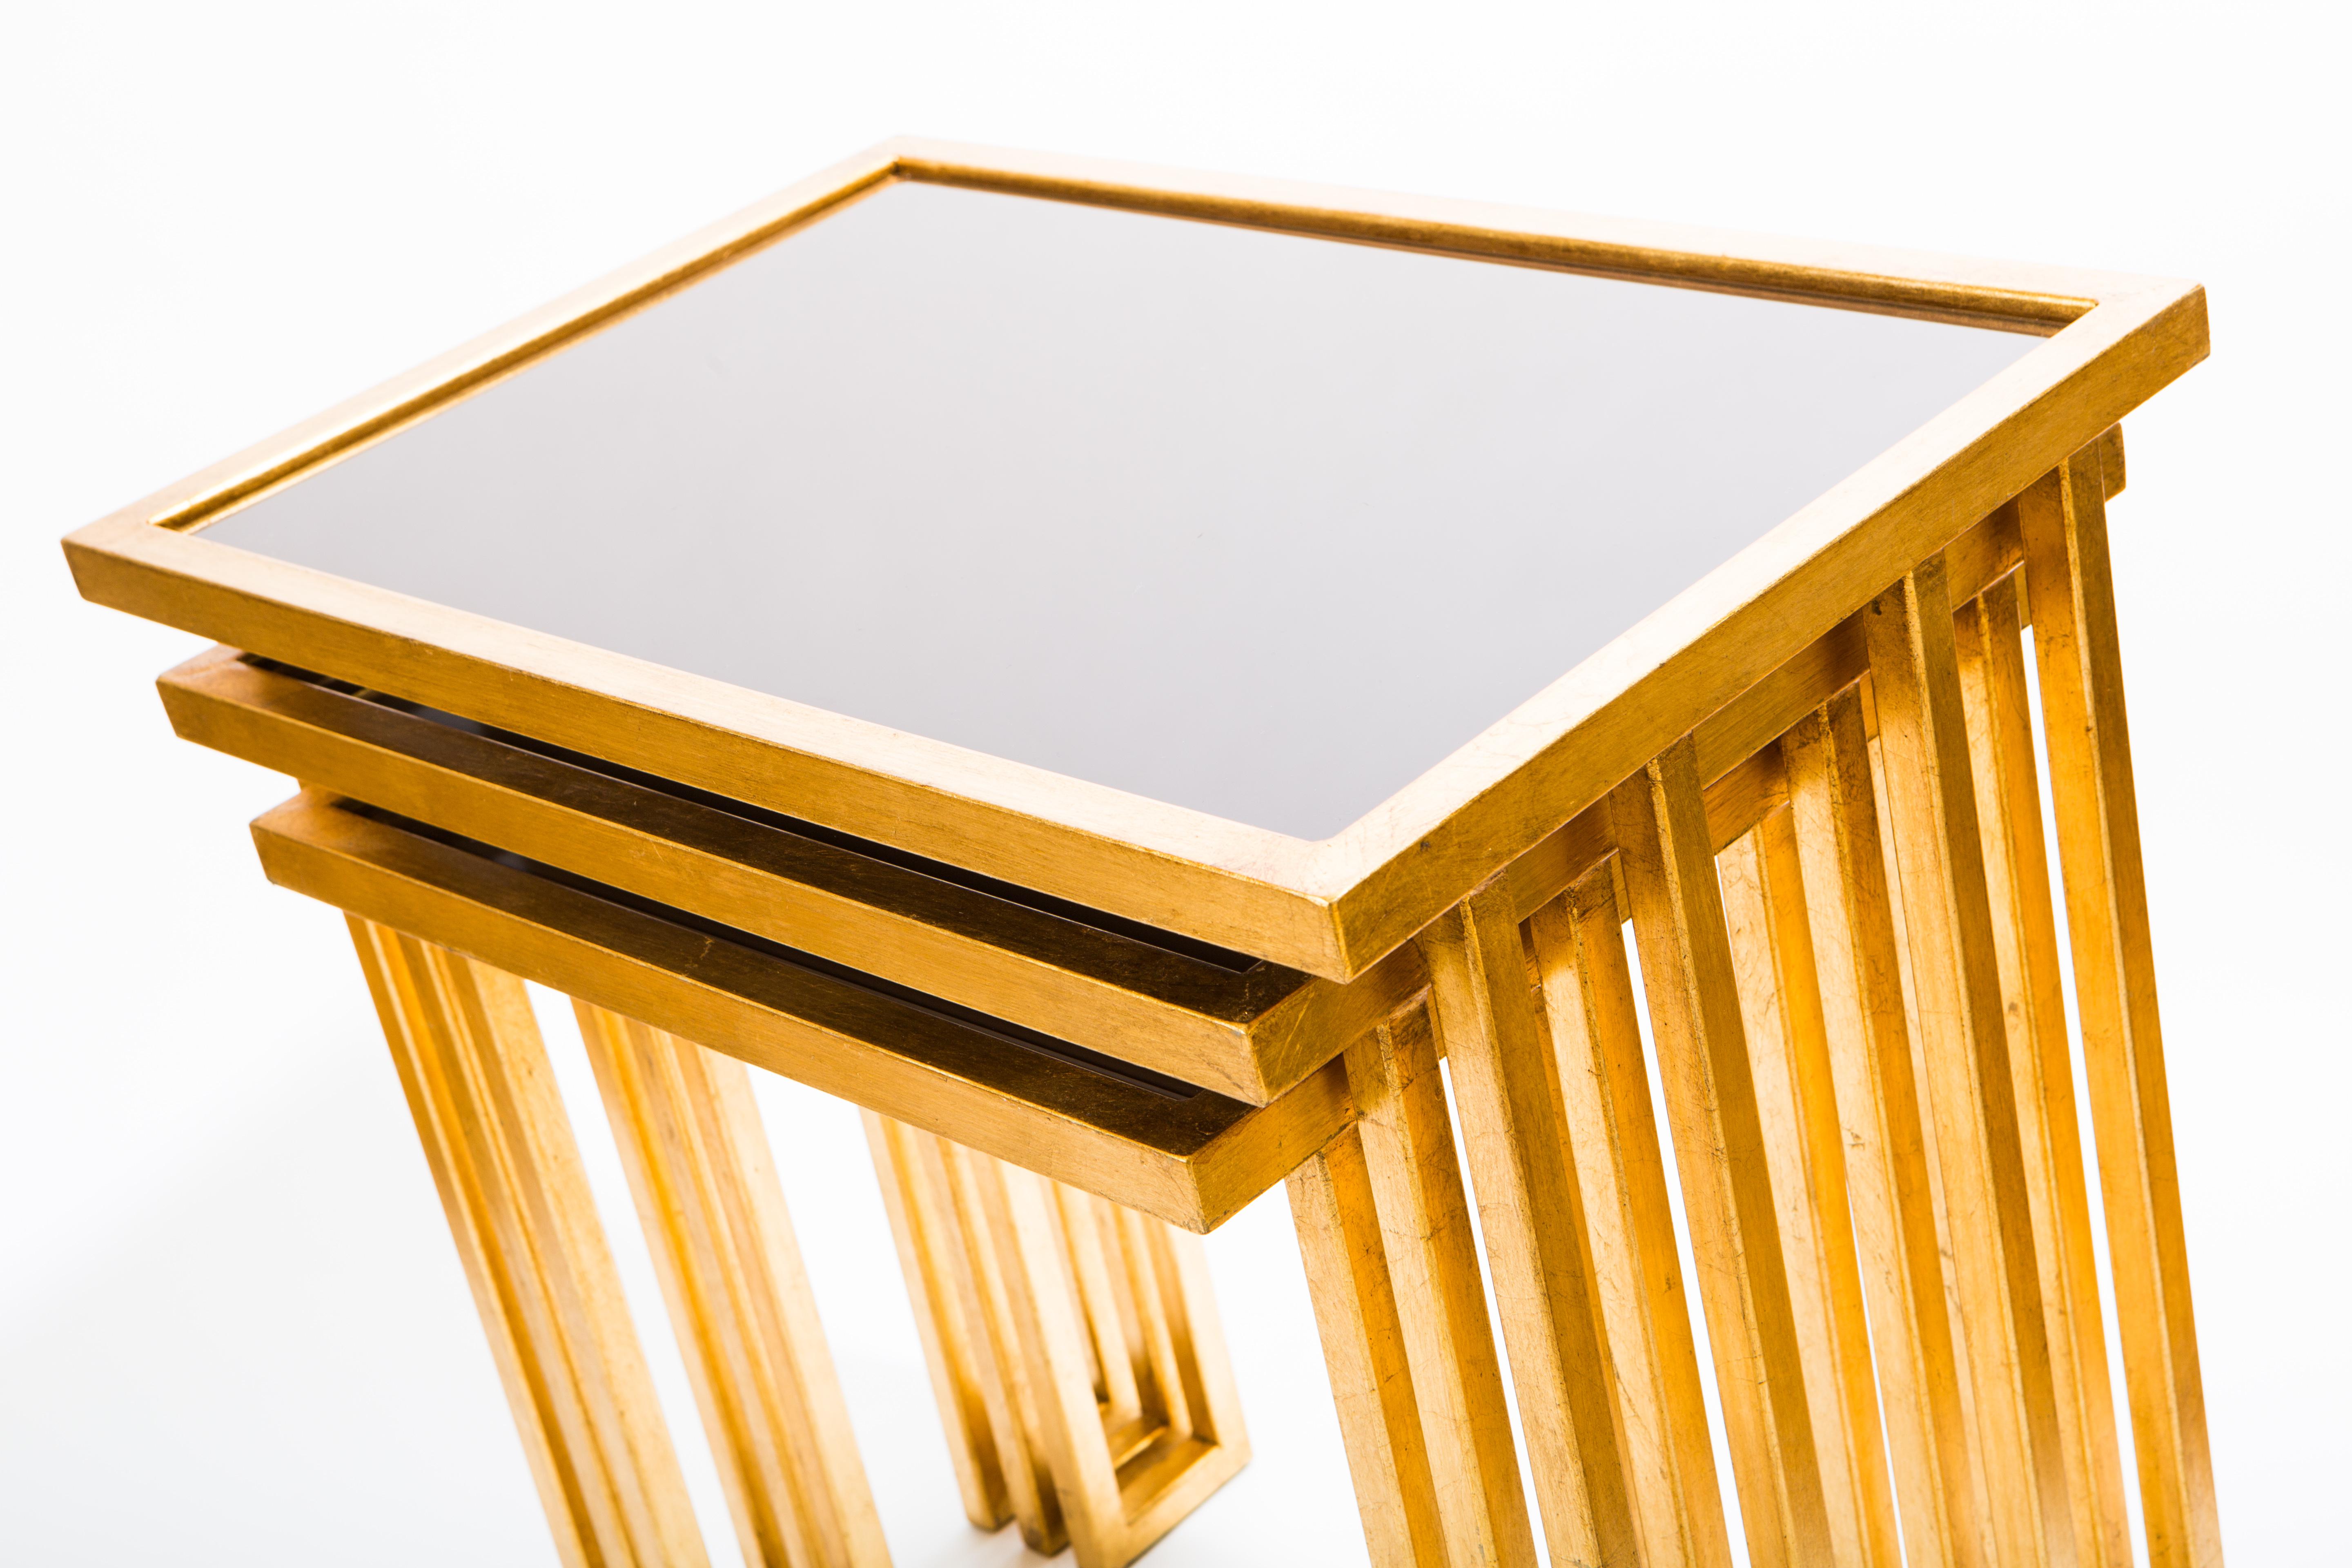 Forged Li Puma Firenze Unique Nesting Tables in 24 Ct Gold Leaf with Bronze Glass Tops For Sale